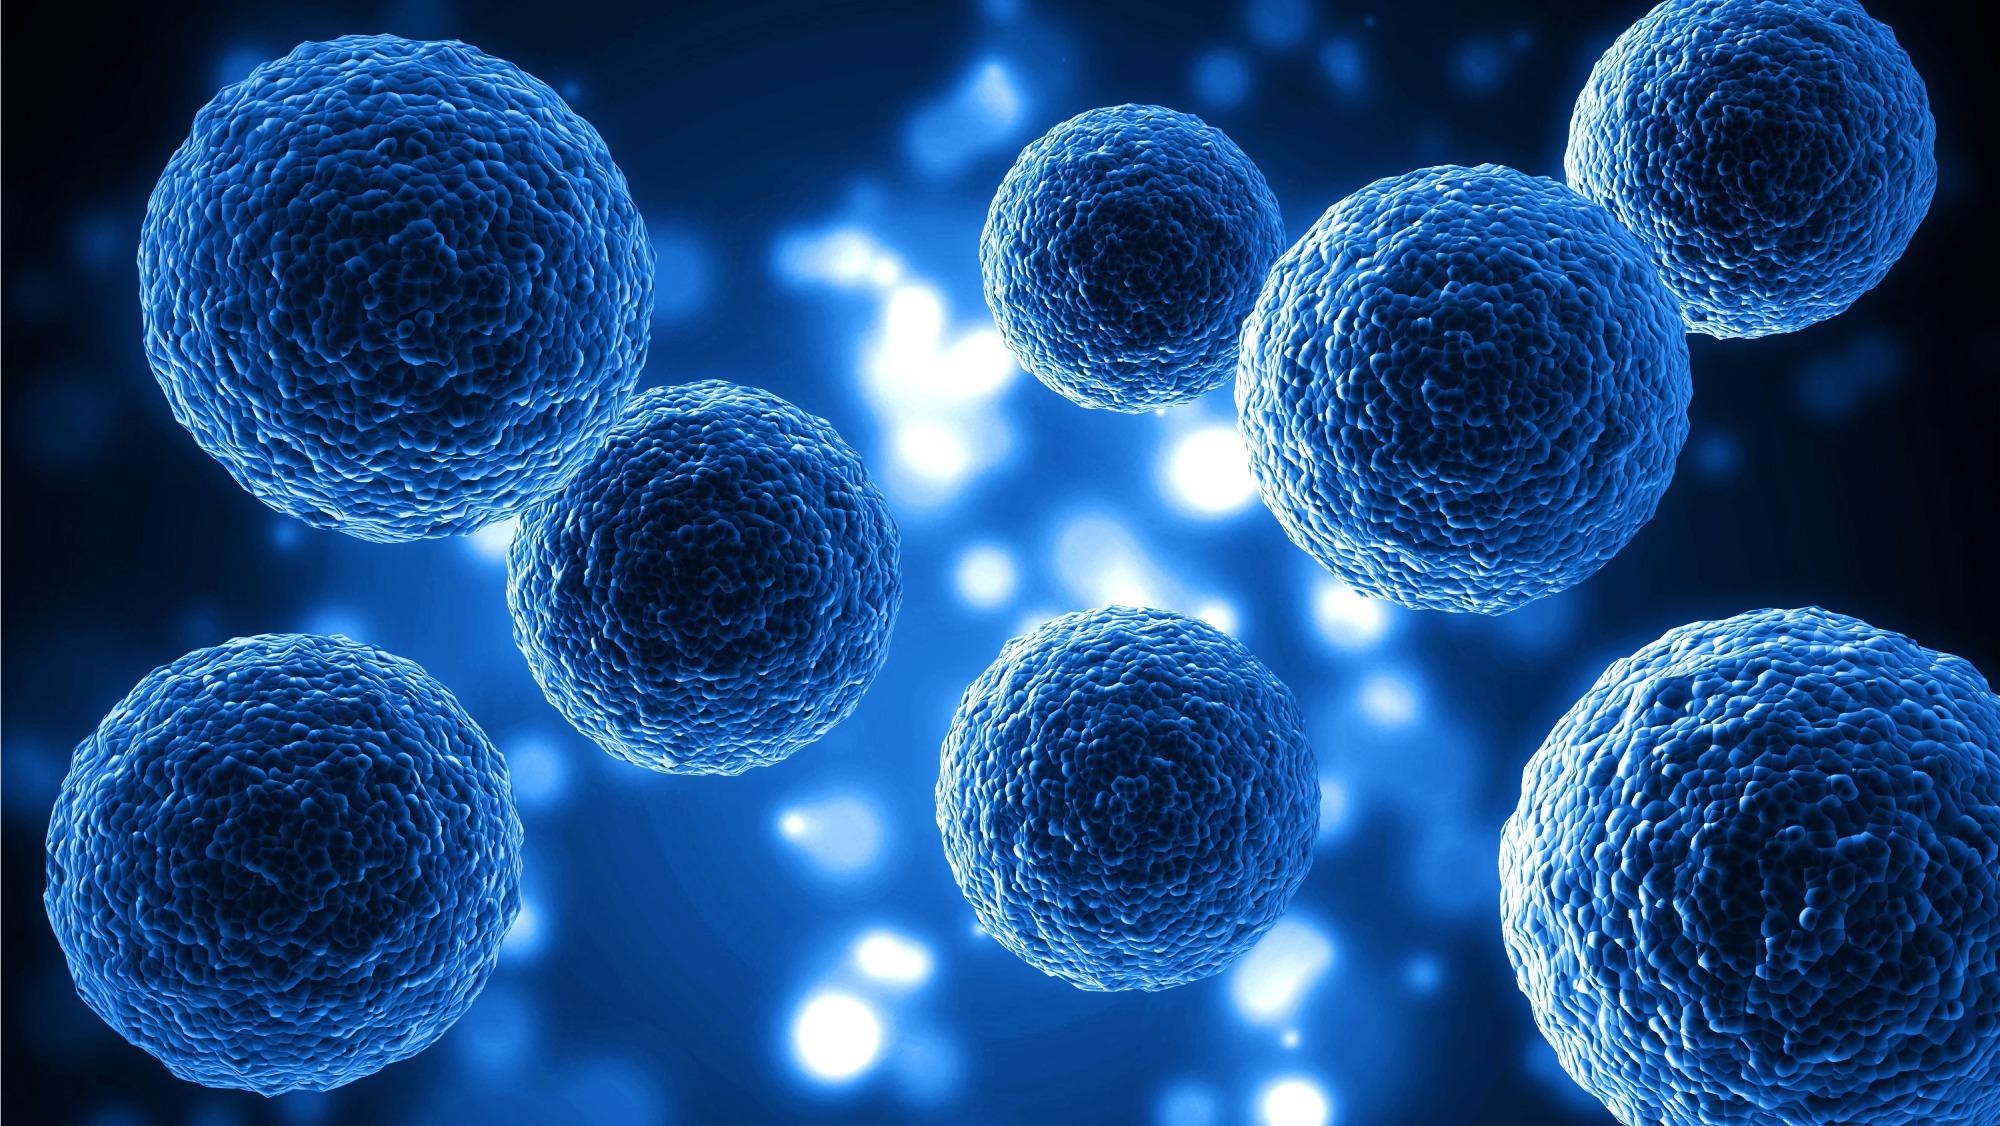 New Process to Form Vesicles that can Carry Vaccine Nanoparticles into Human Cells.